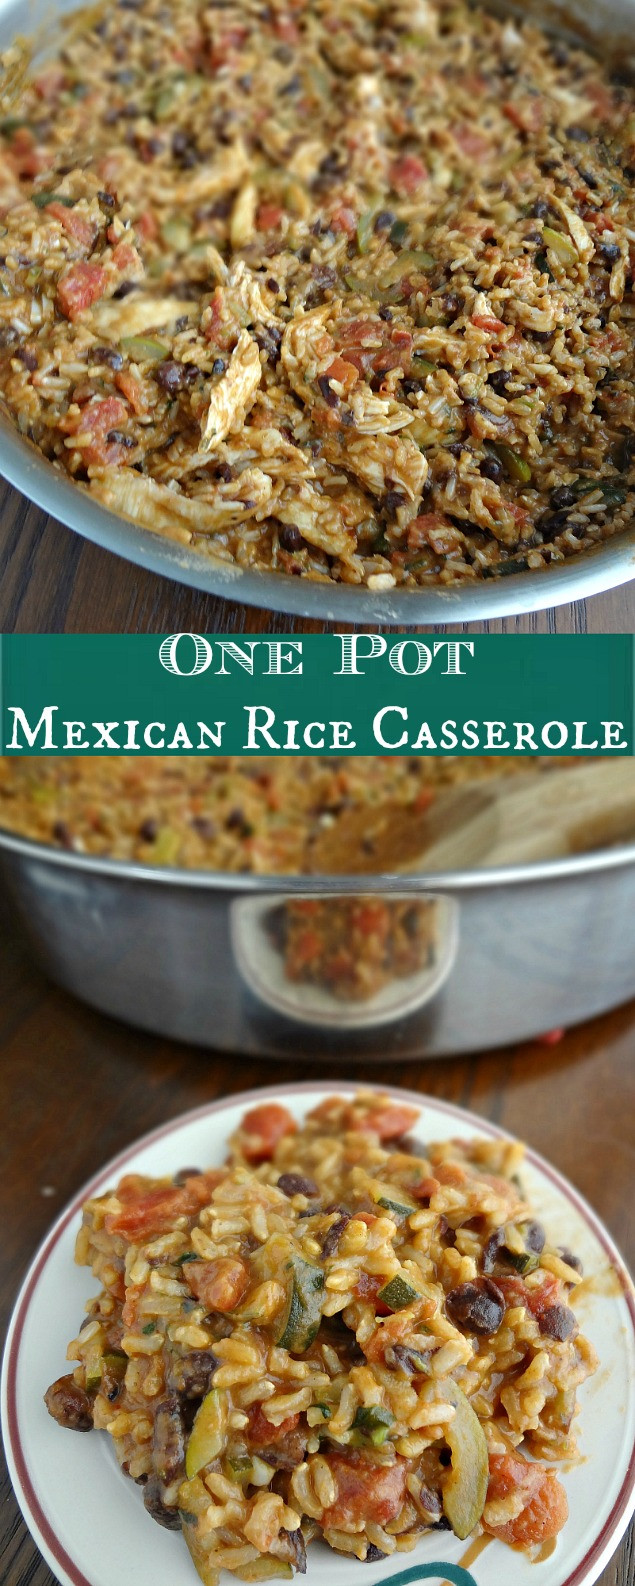 One Pot Mexican Beef And Rice Casserole
 The Cooking Actress e Pot Mexican Rice Casserole